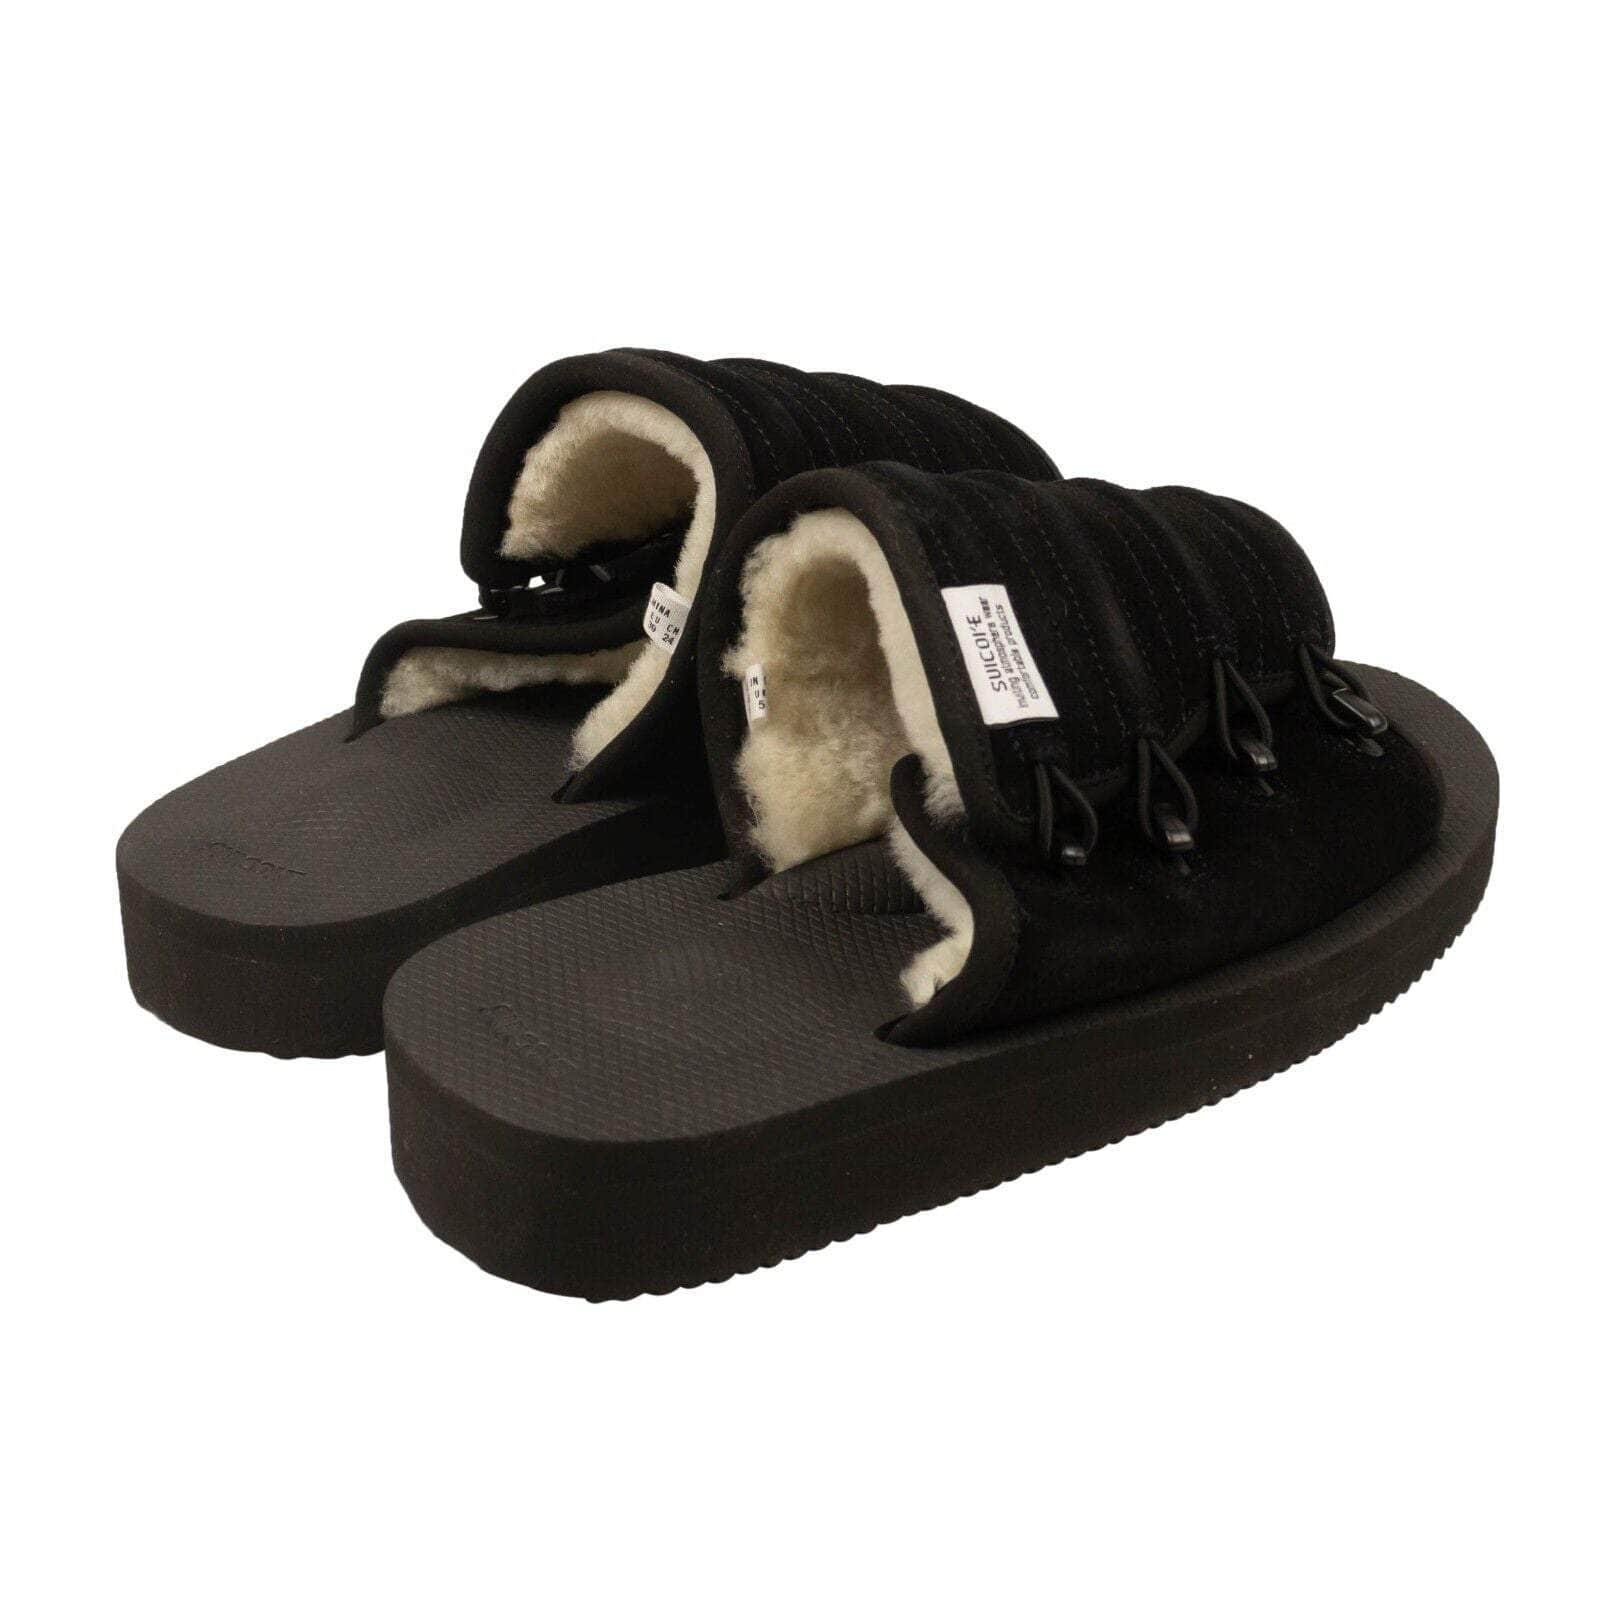 Suicoke channelenable-all, chicmi, couponcollection, gender-mens, main-shoes, mens-shoes, mens-slides-slippers, size-6, size-7, suicoke, under-250 Black Mura Leather Fur Slides